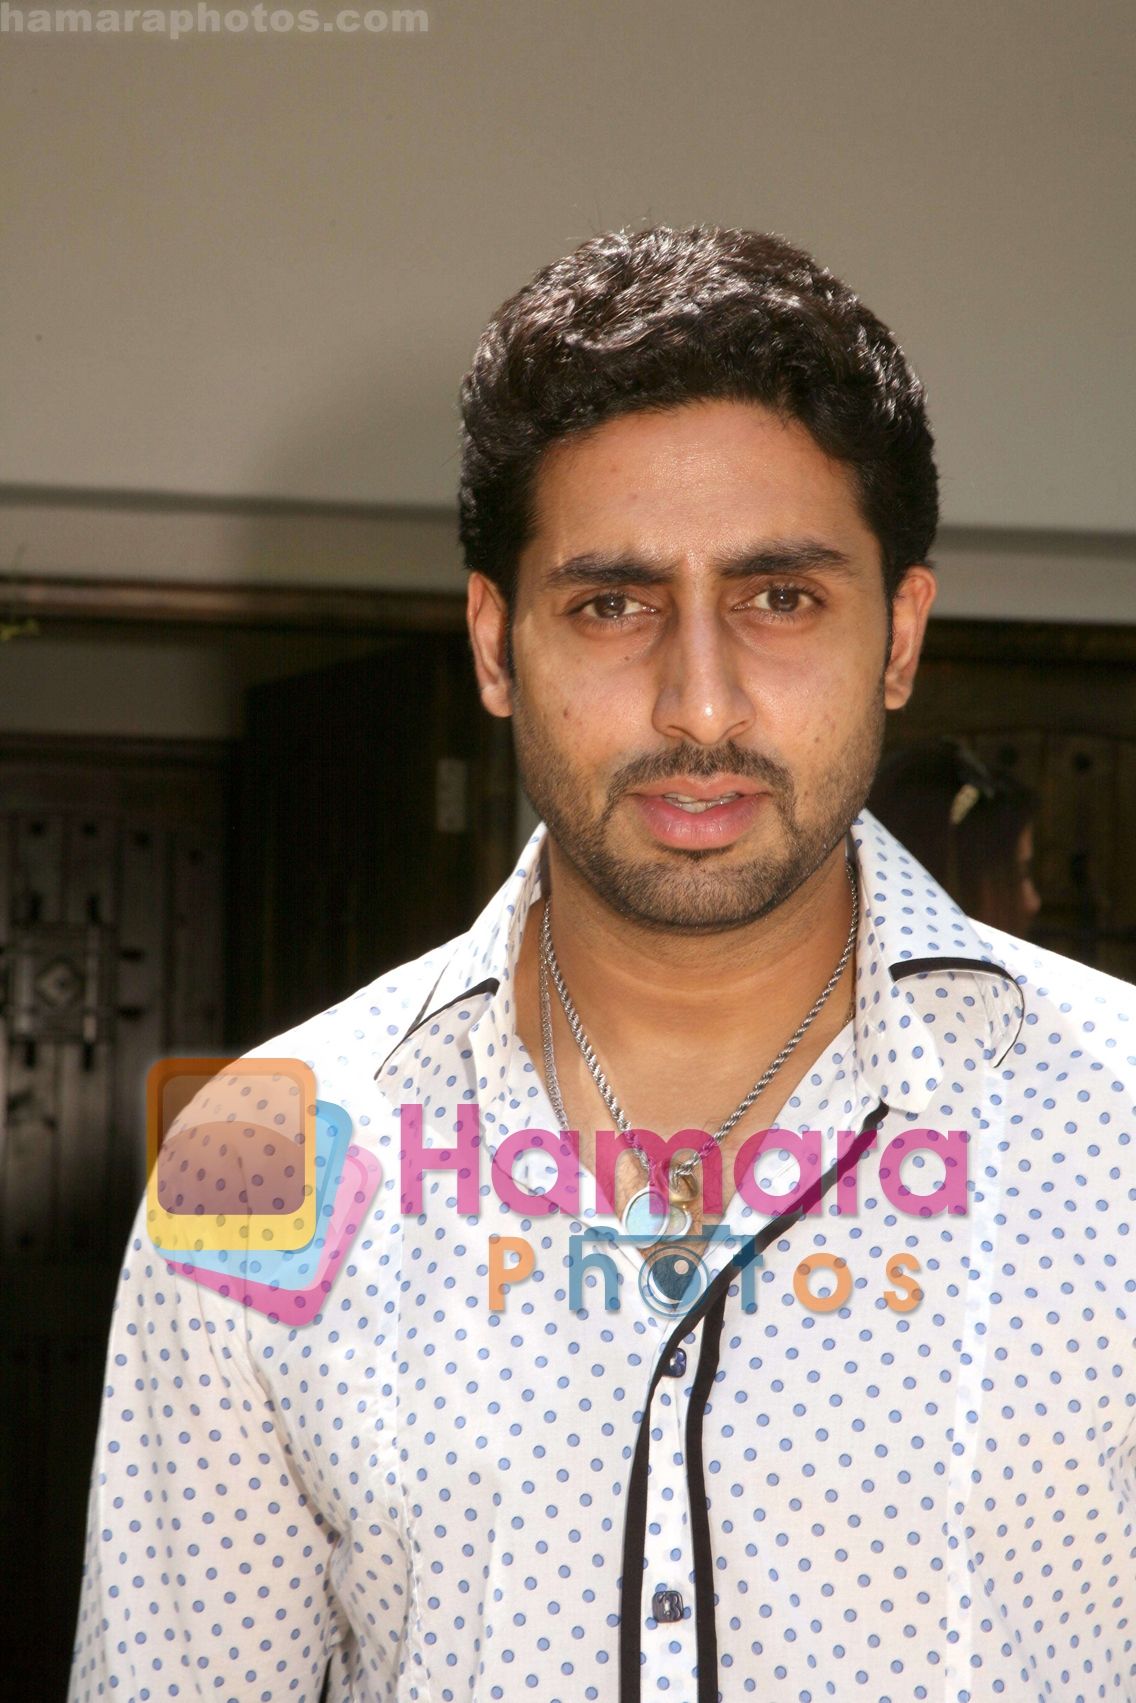 Abhishek Bachchan at The Unforgettable Tour in Sunset Marquis Hotel on July 24th 2008 